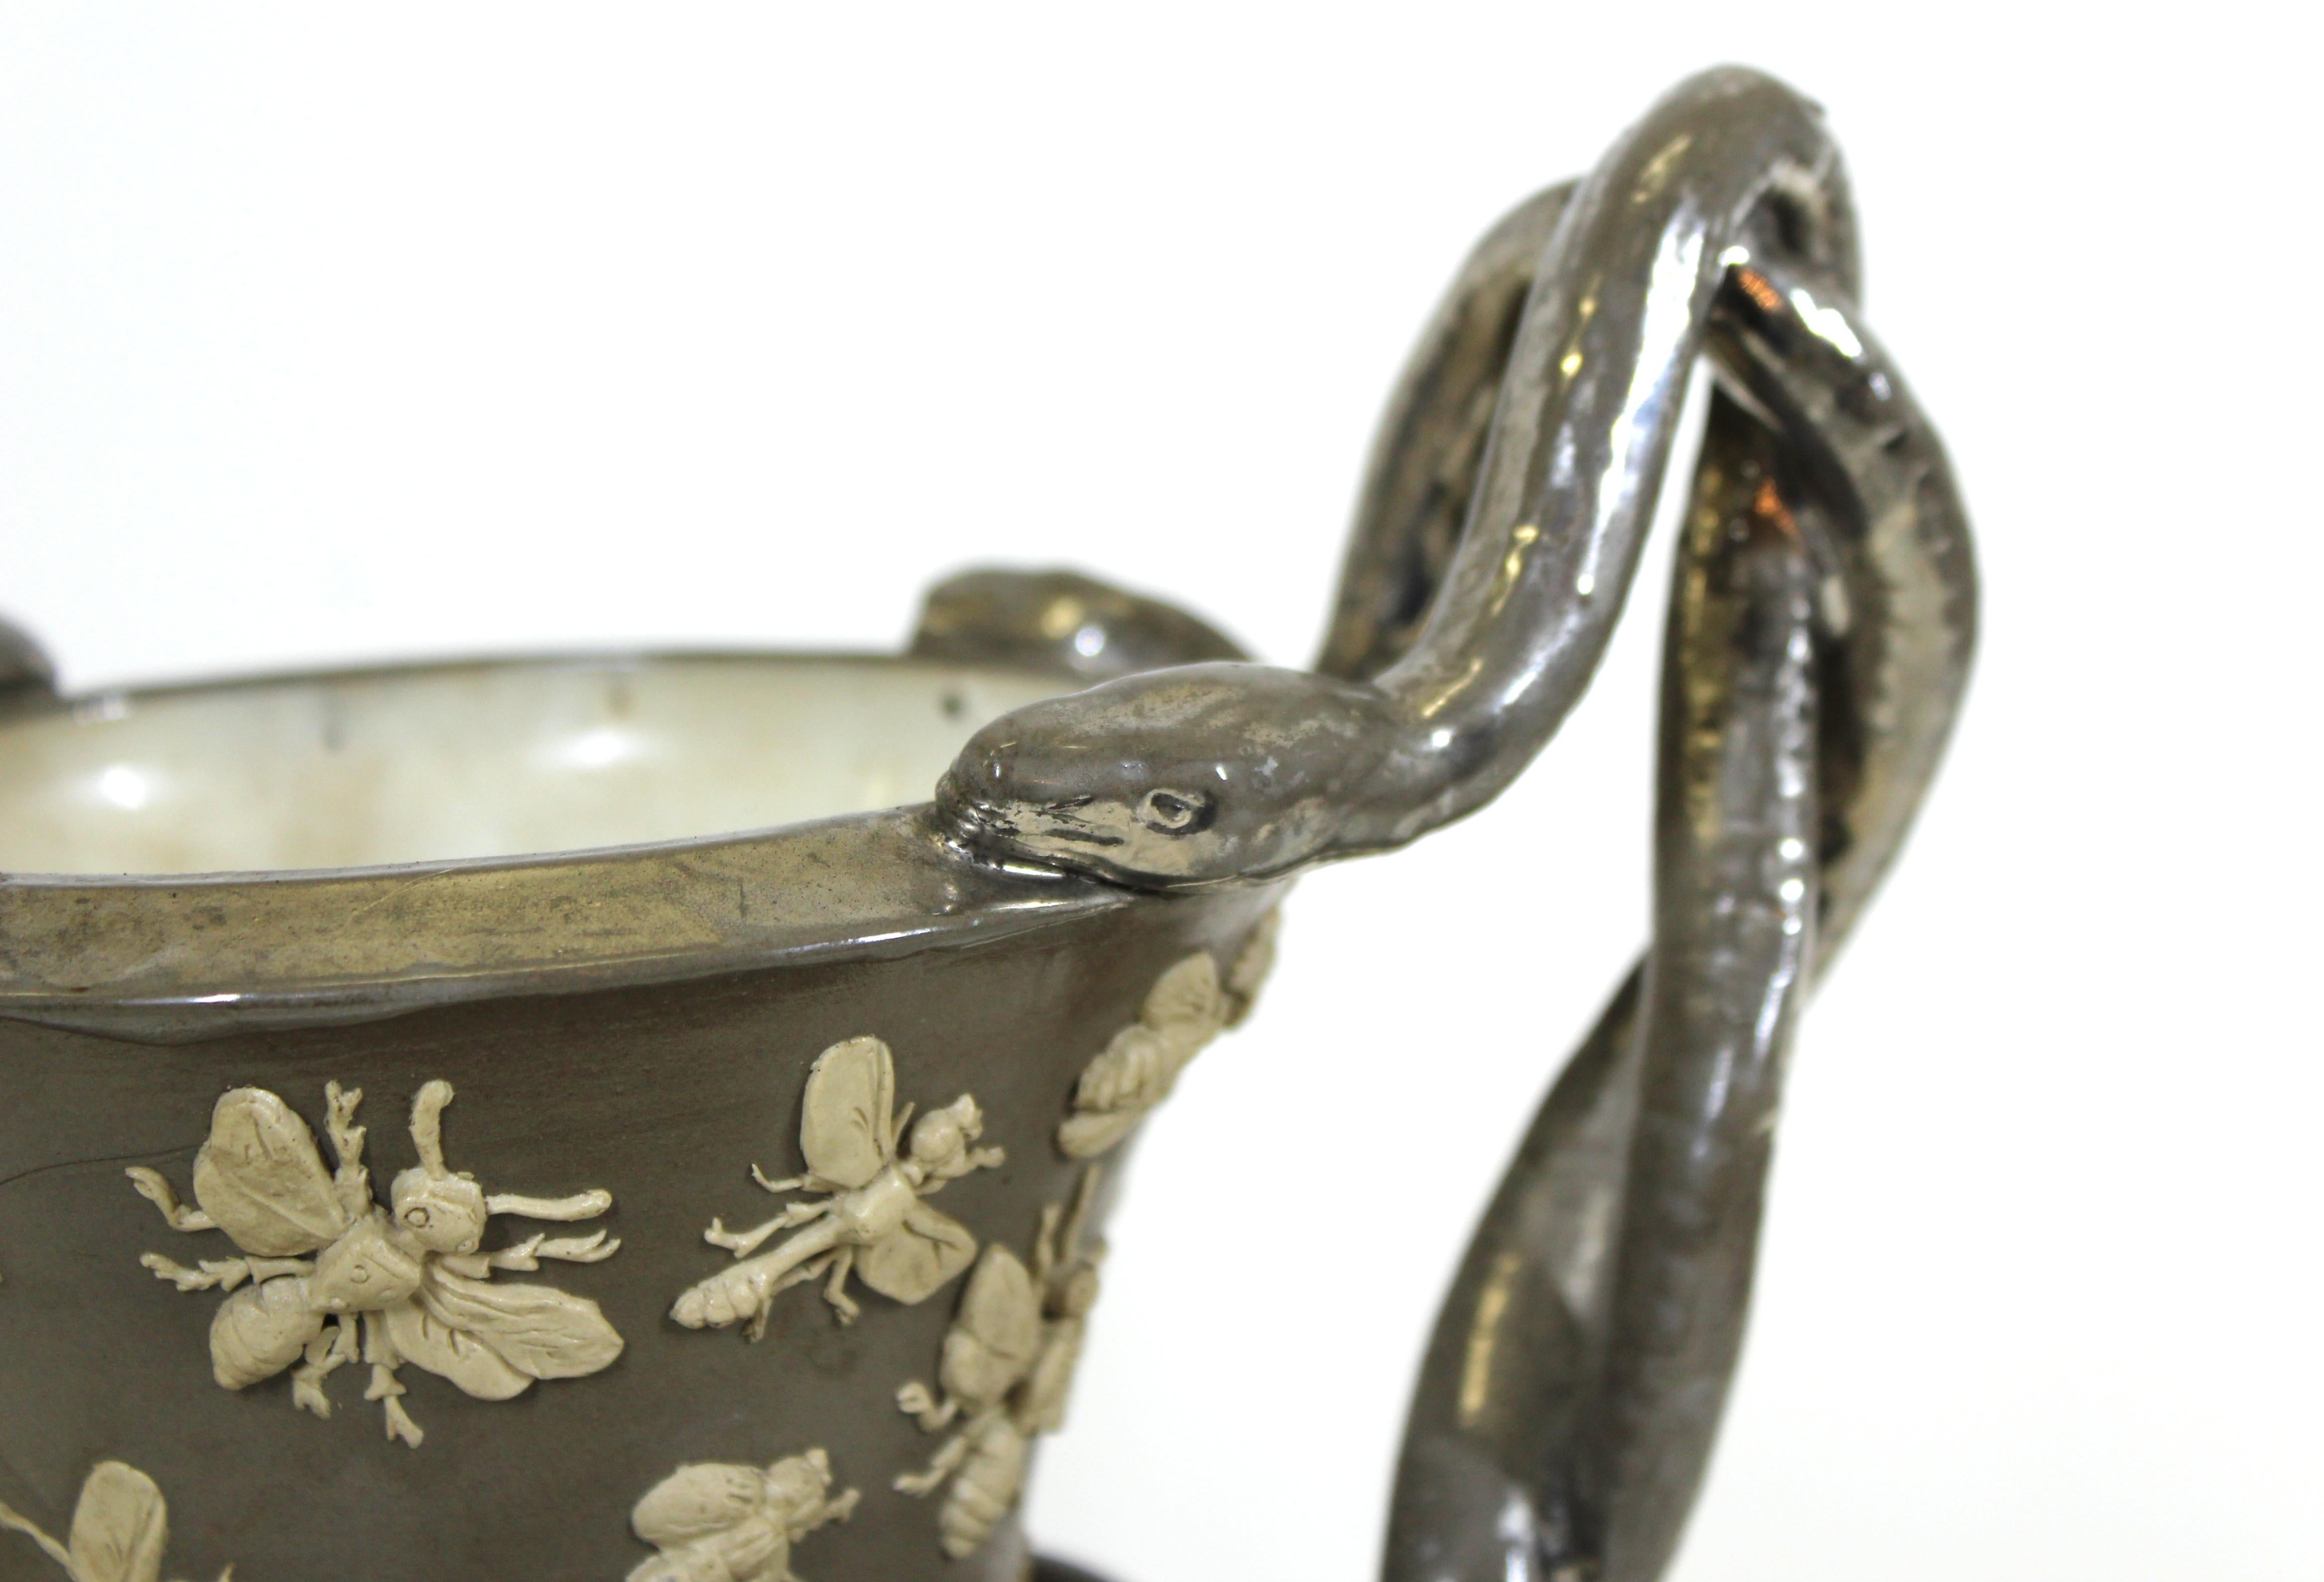 Ceramic German Aesthetic Style Exhibition Vase with Bugs, Bees and Snake Handles